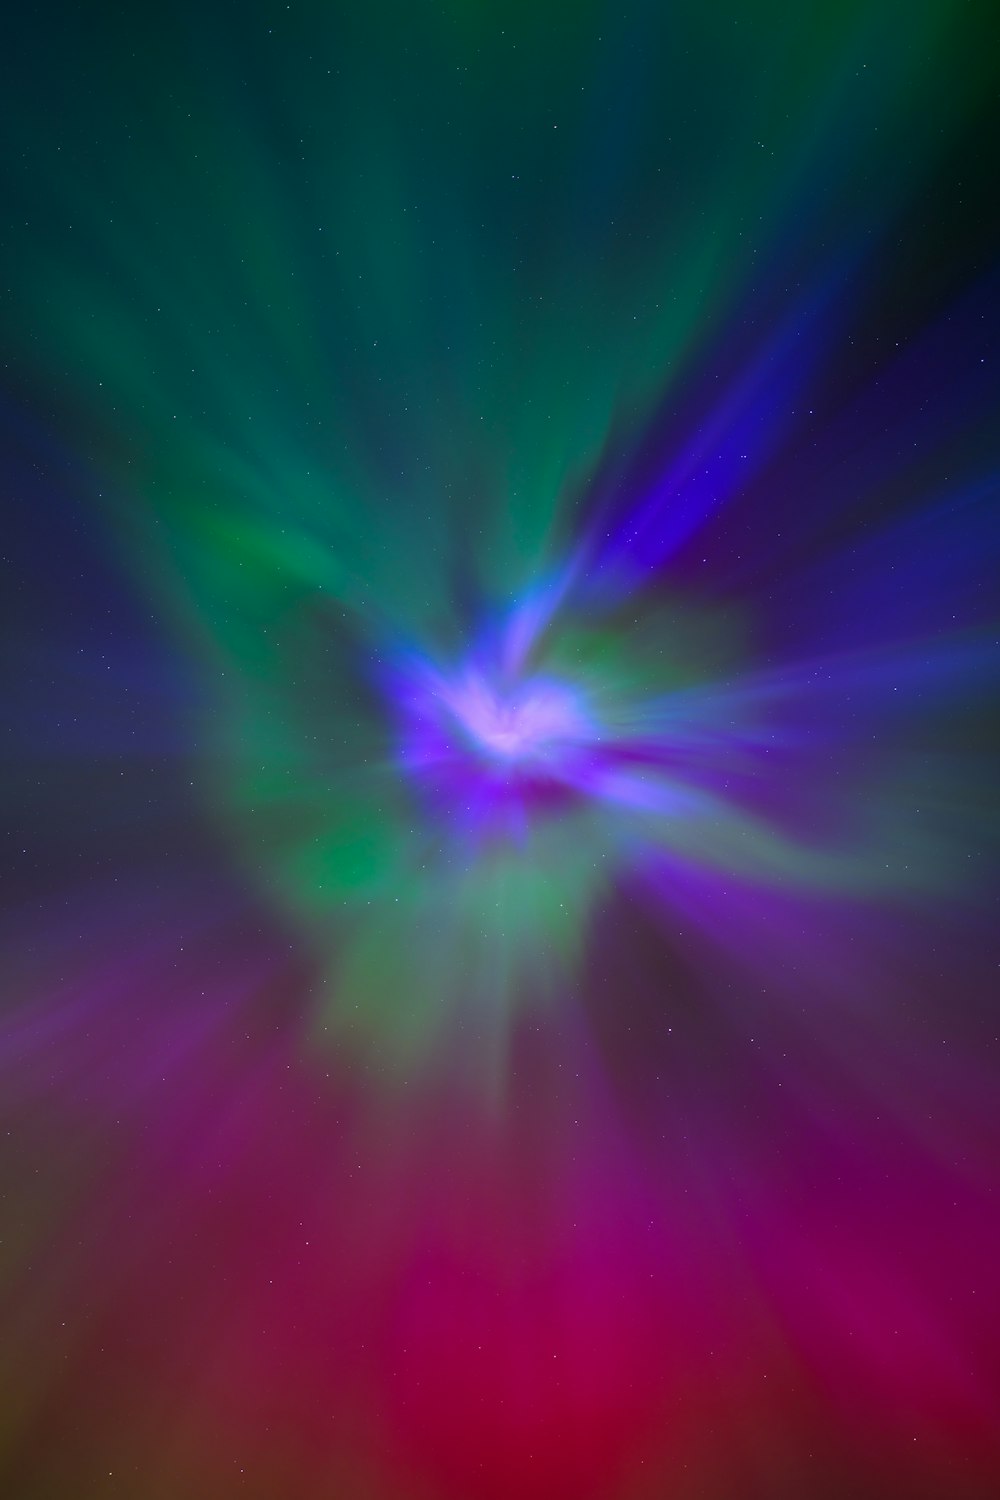 a colorful background with a star burst in the center